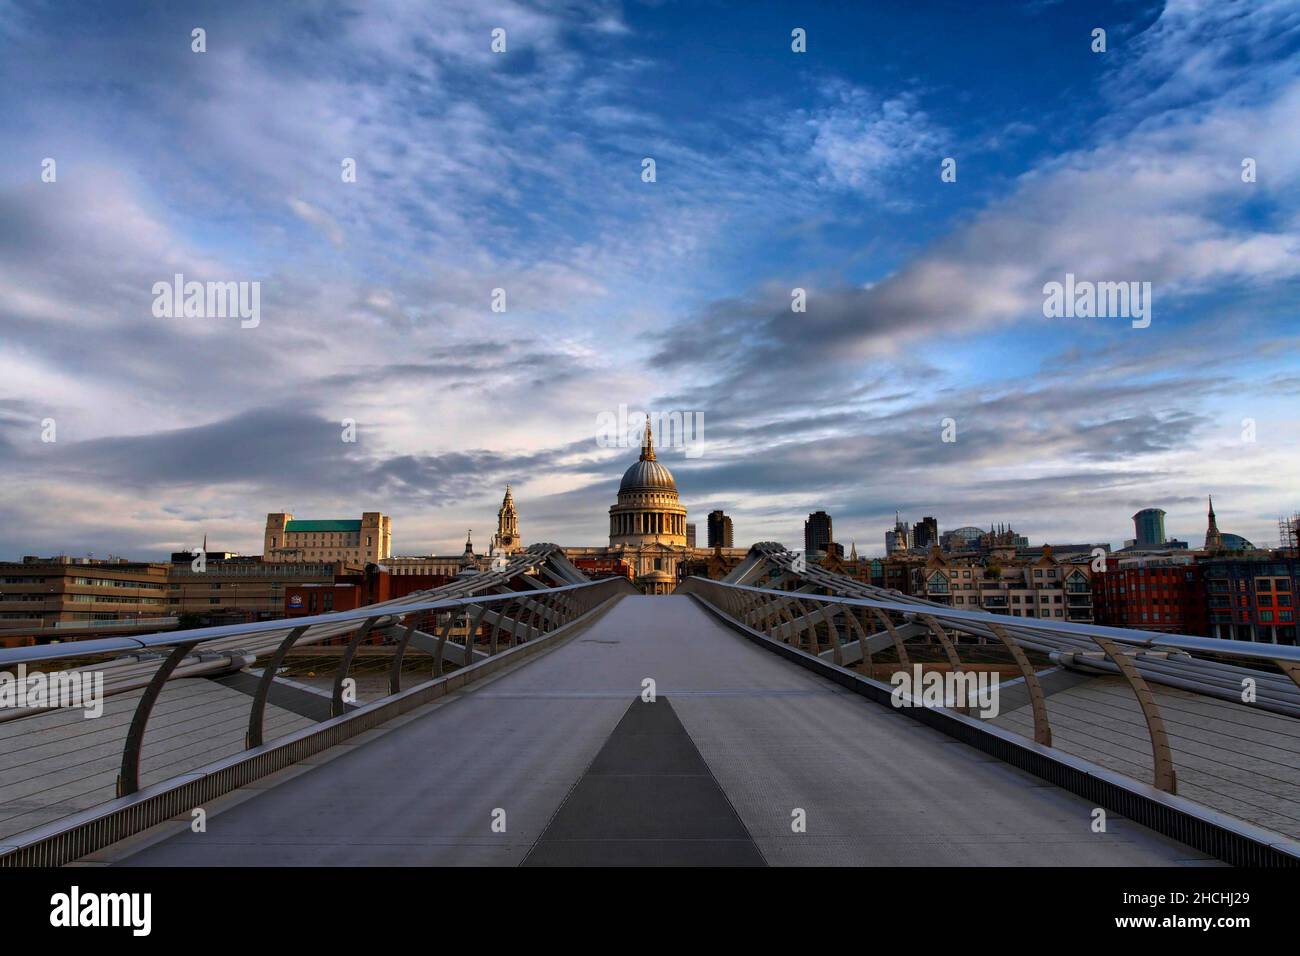 St. Paul's Cathedral from the Millenium Bridge Stock Photo